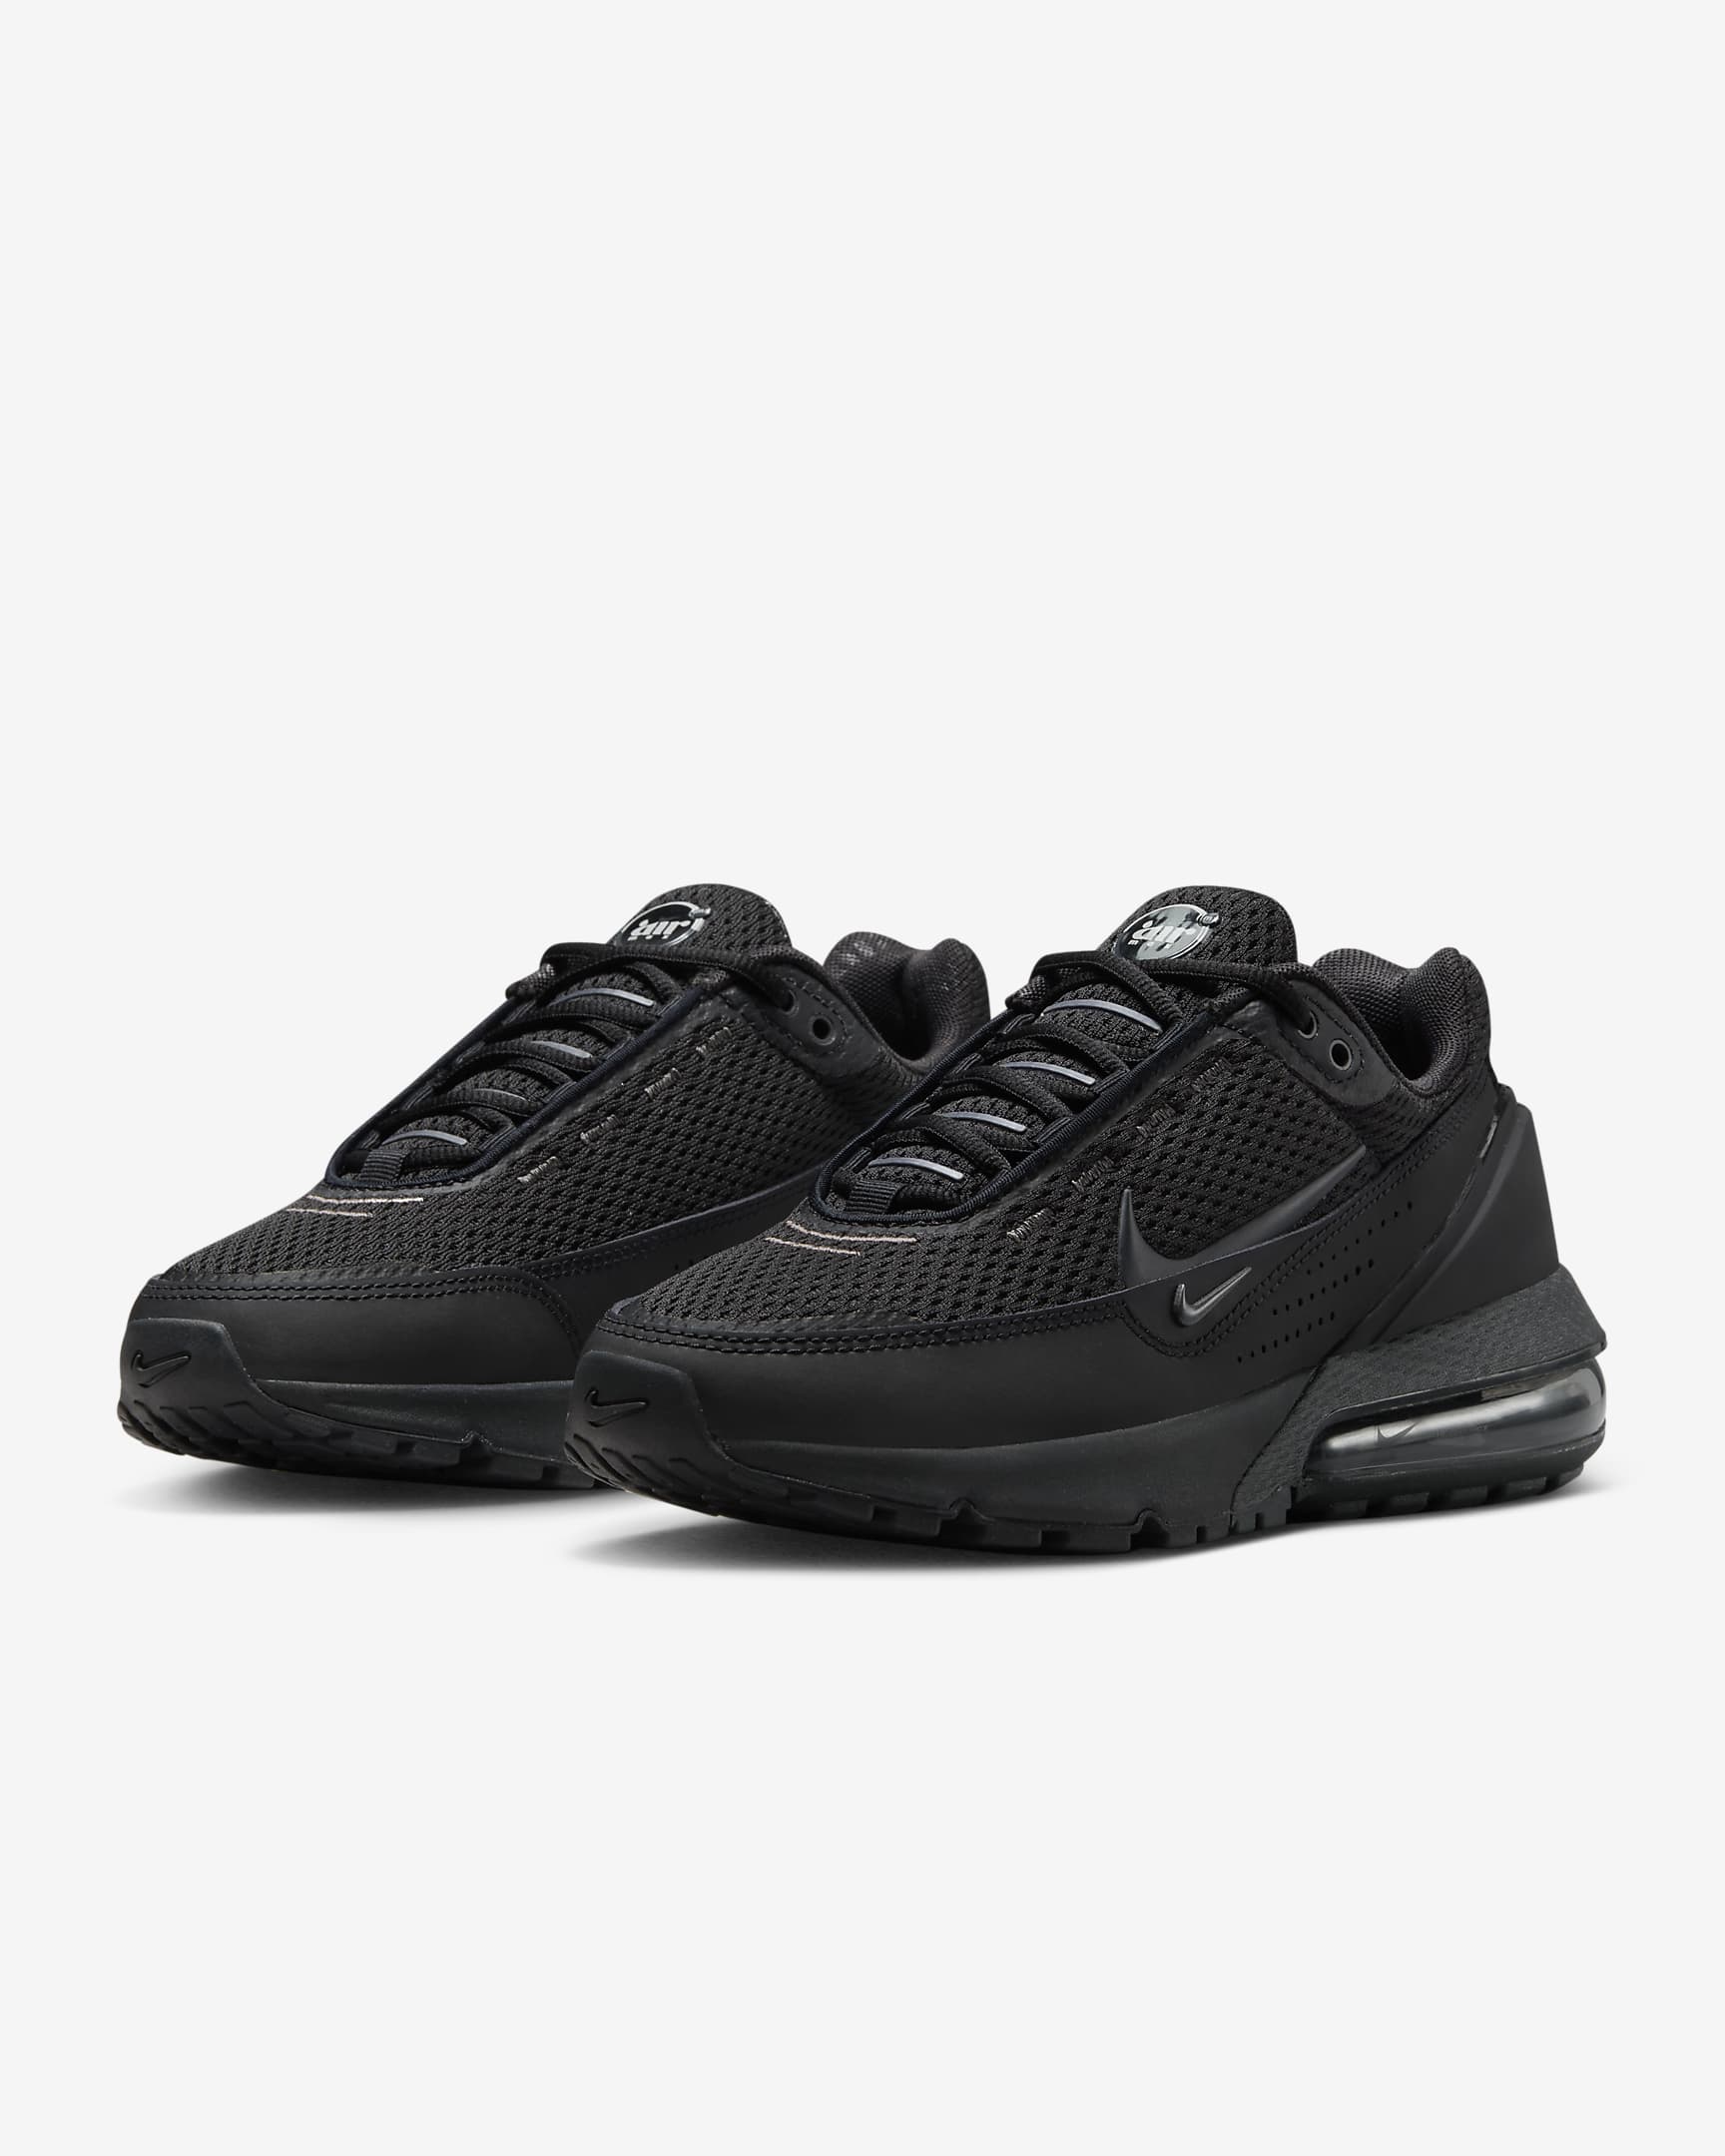 Nike Air Max Pulse Women's Shoes - Black/Anthracite/Particle Grey/Black